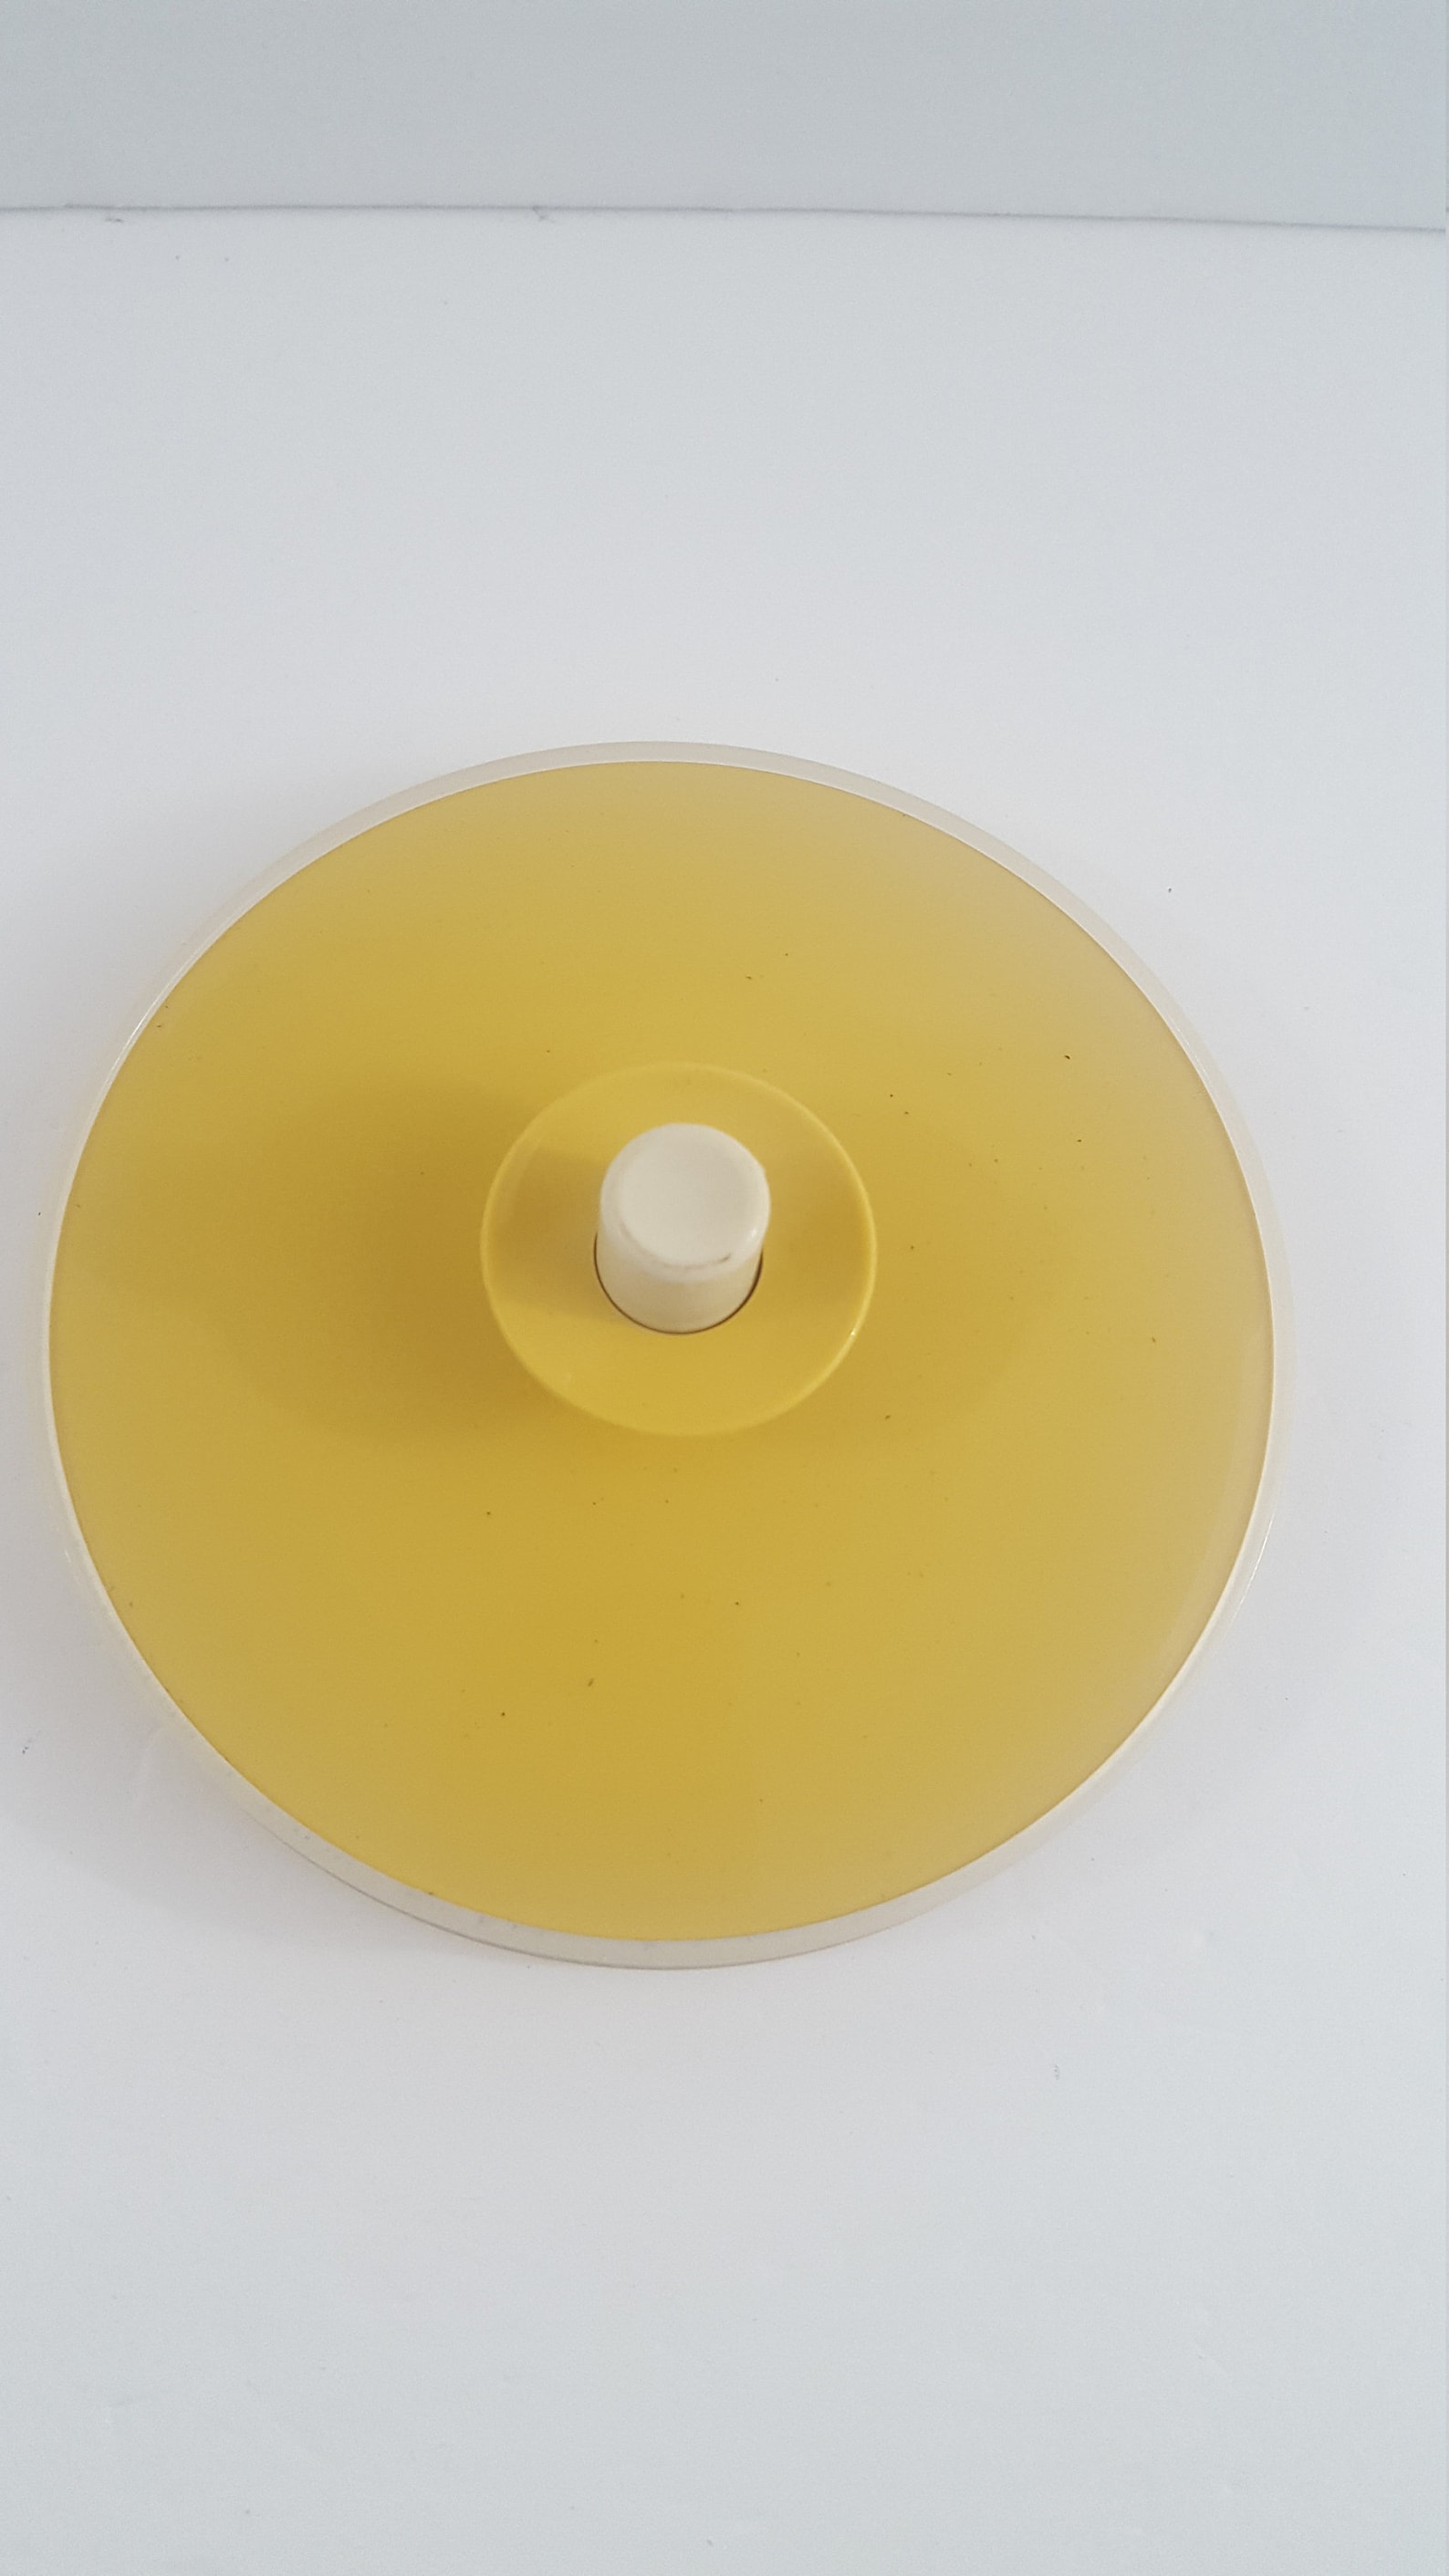 Tupperware Replacement Gold Pitcher Seal Cover Lid ONLY 801 Etsy